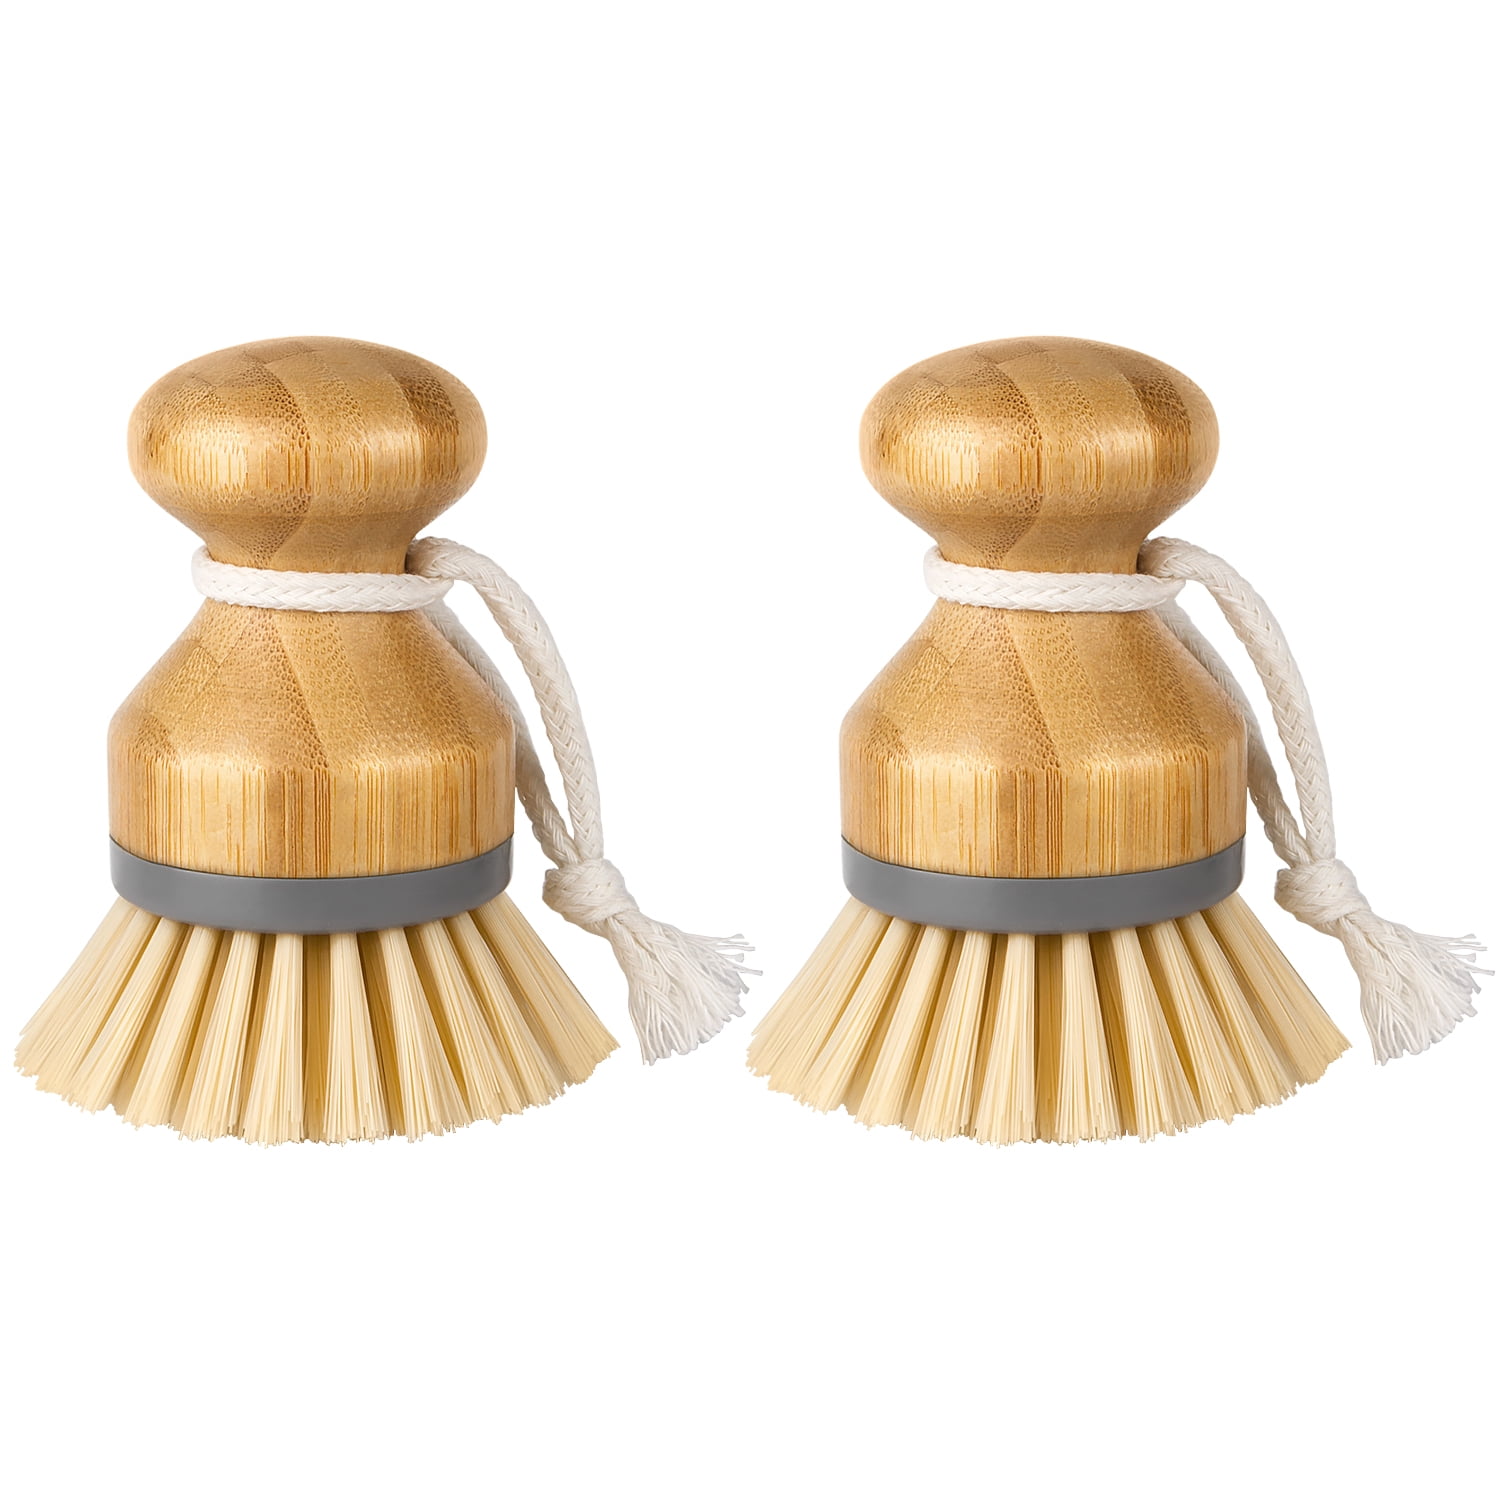 Bamboo Dish Scrubber With Handle - HPG - Promotional Products Supplier